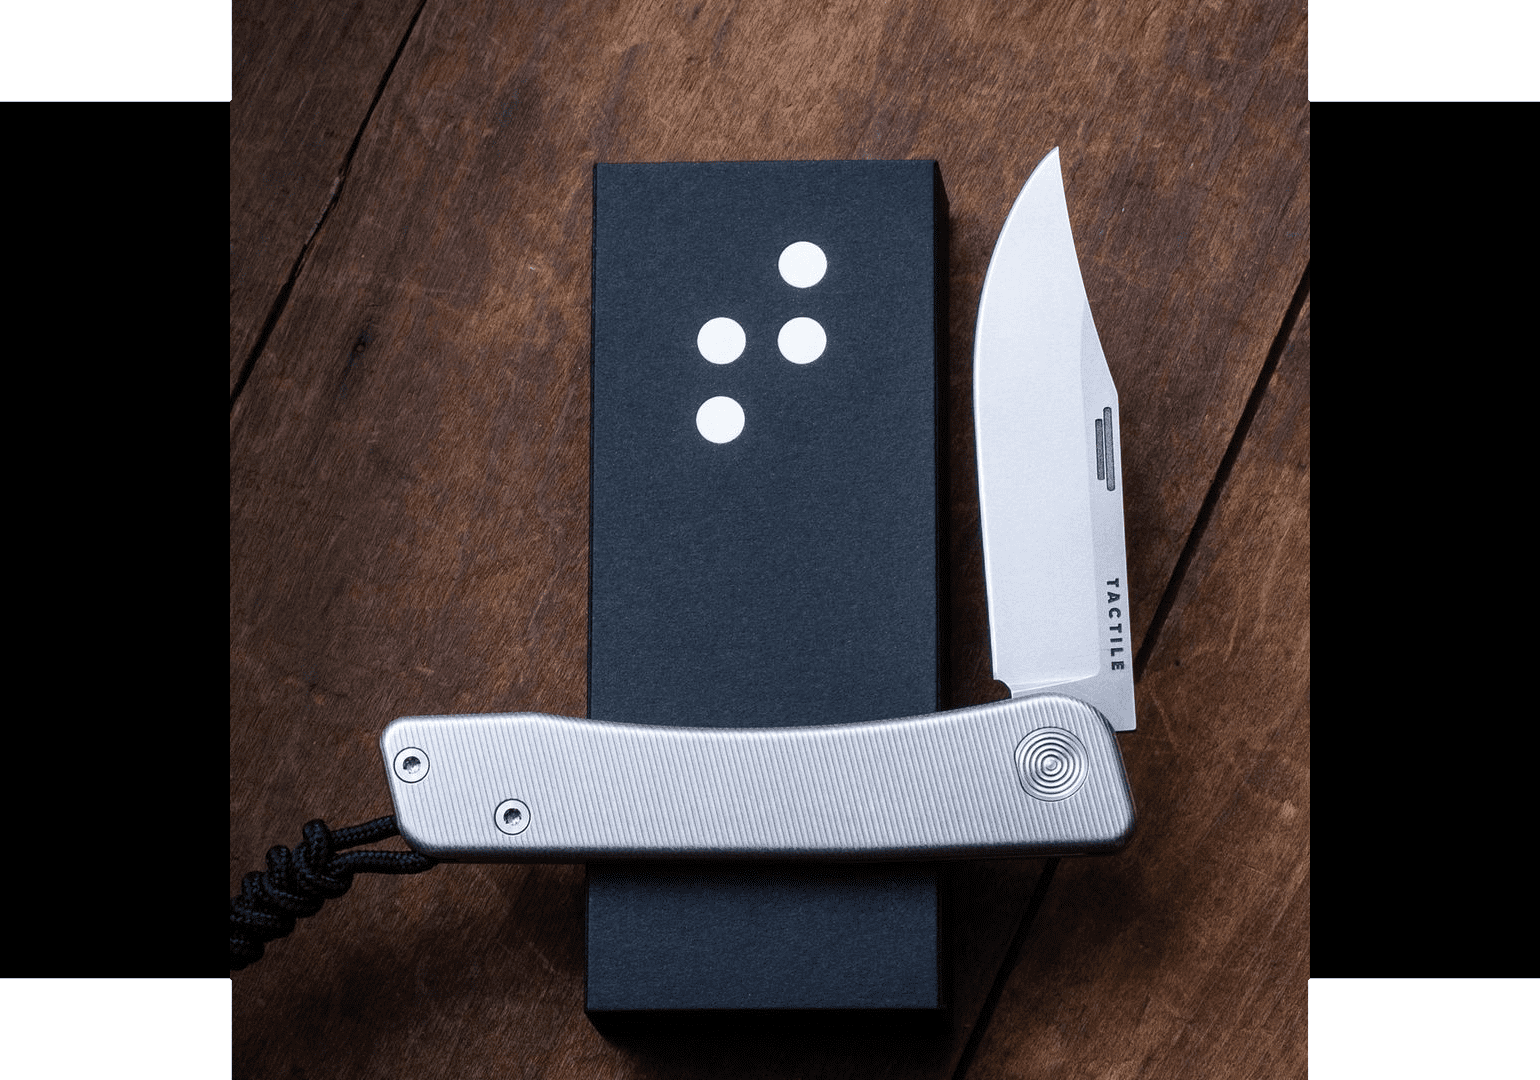 KnivesShipFree Offers Double Reward Points and Specials for National Knife Day